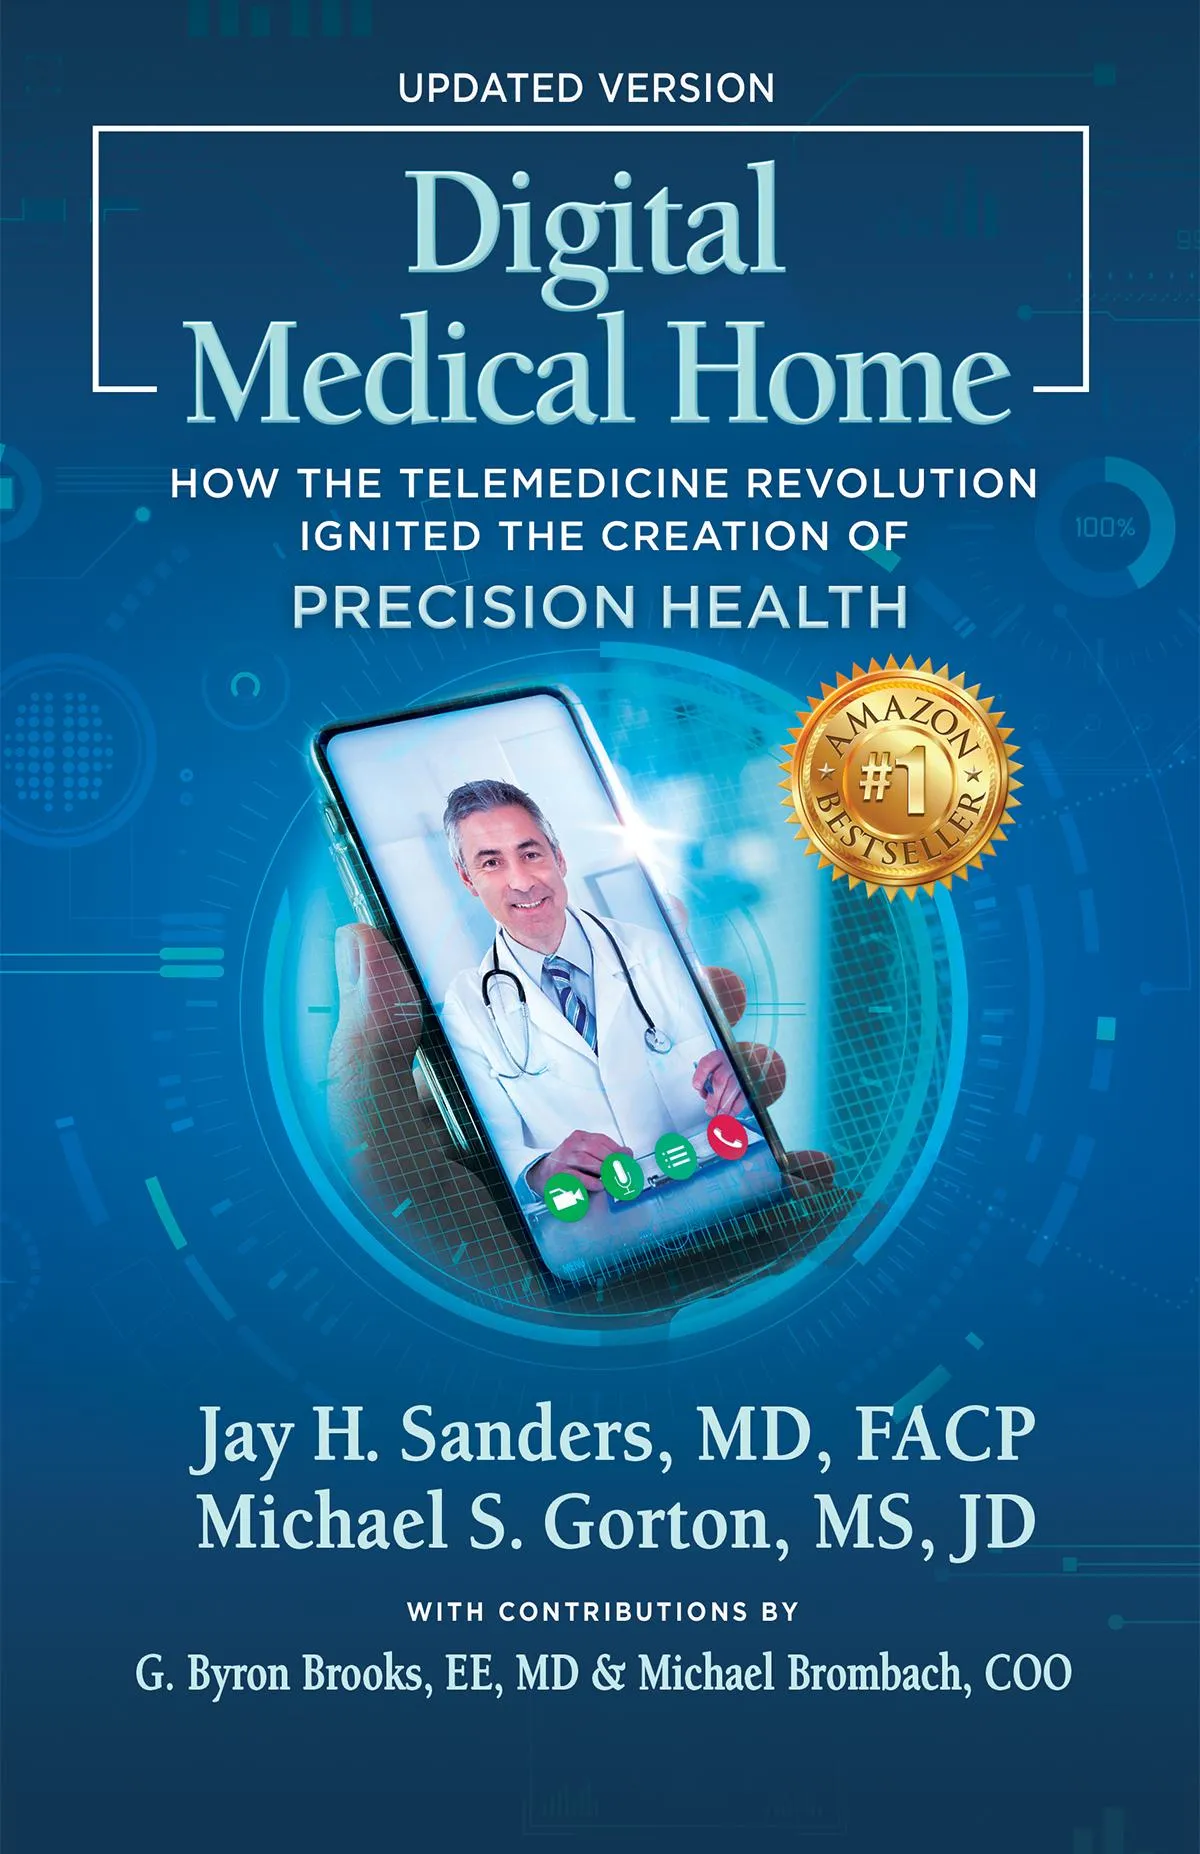 Digital Medical Home by Michael S. Gorton and Jay H. Sanders